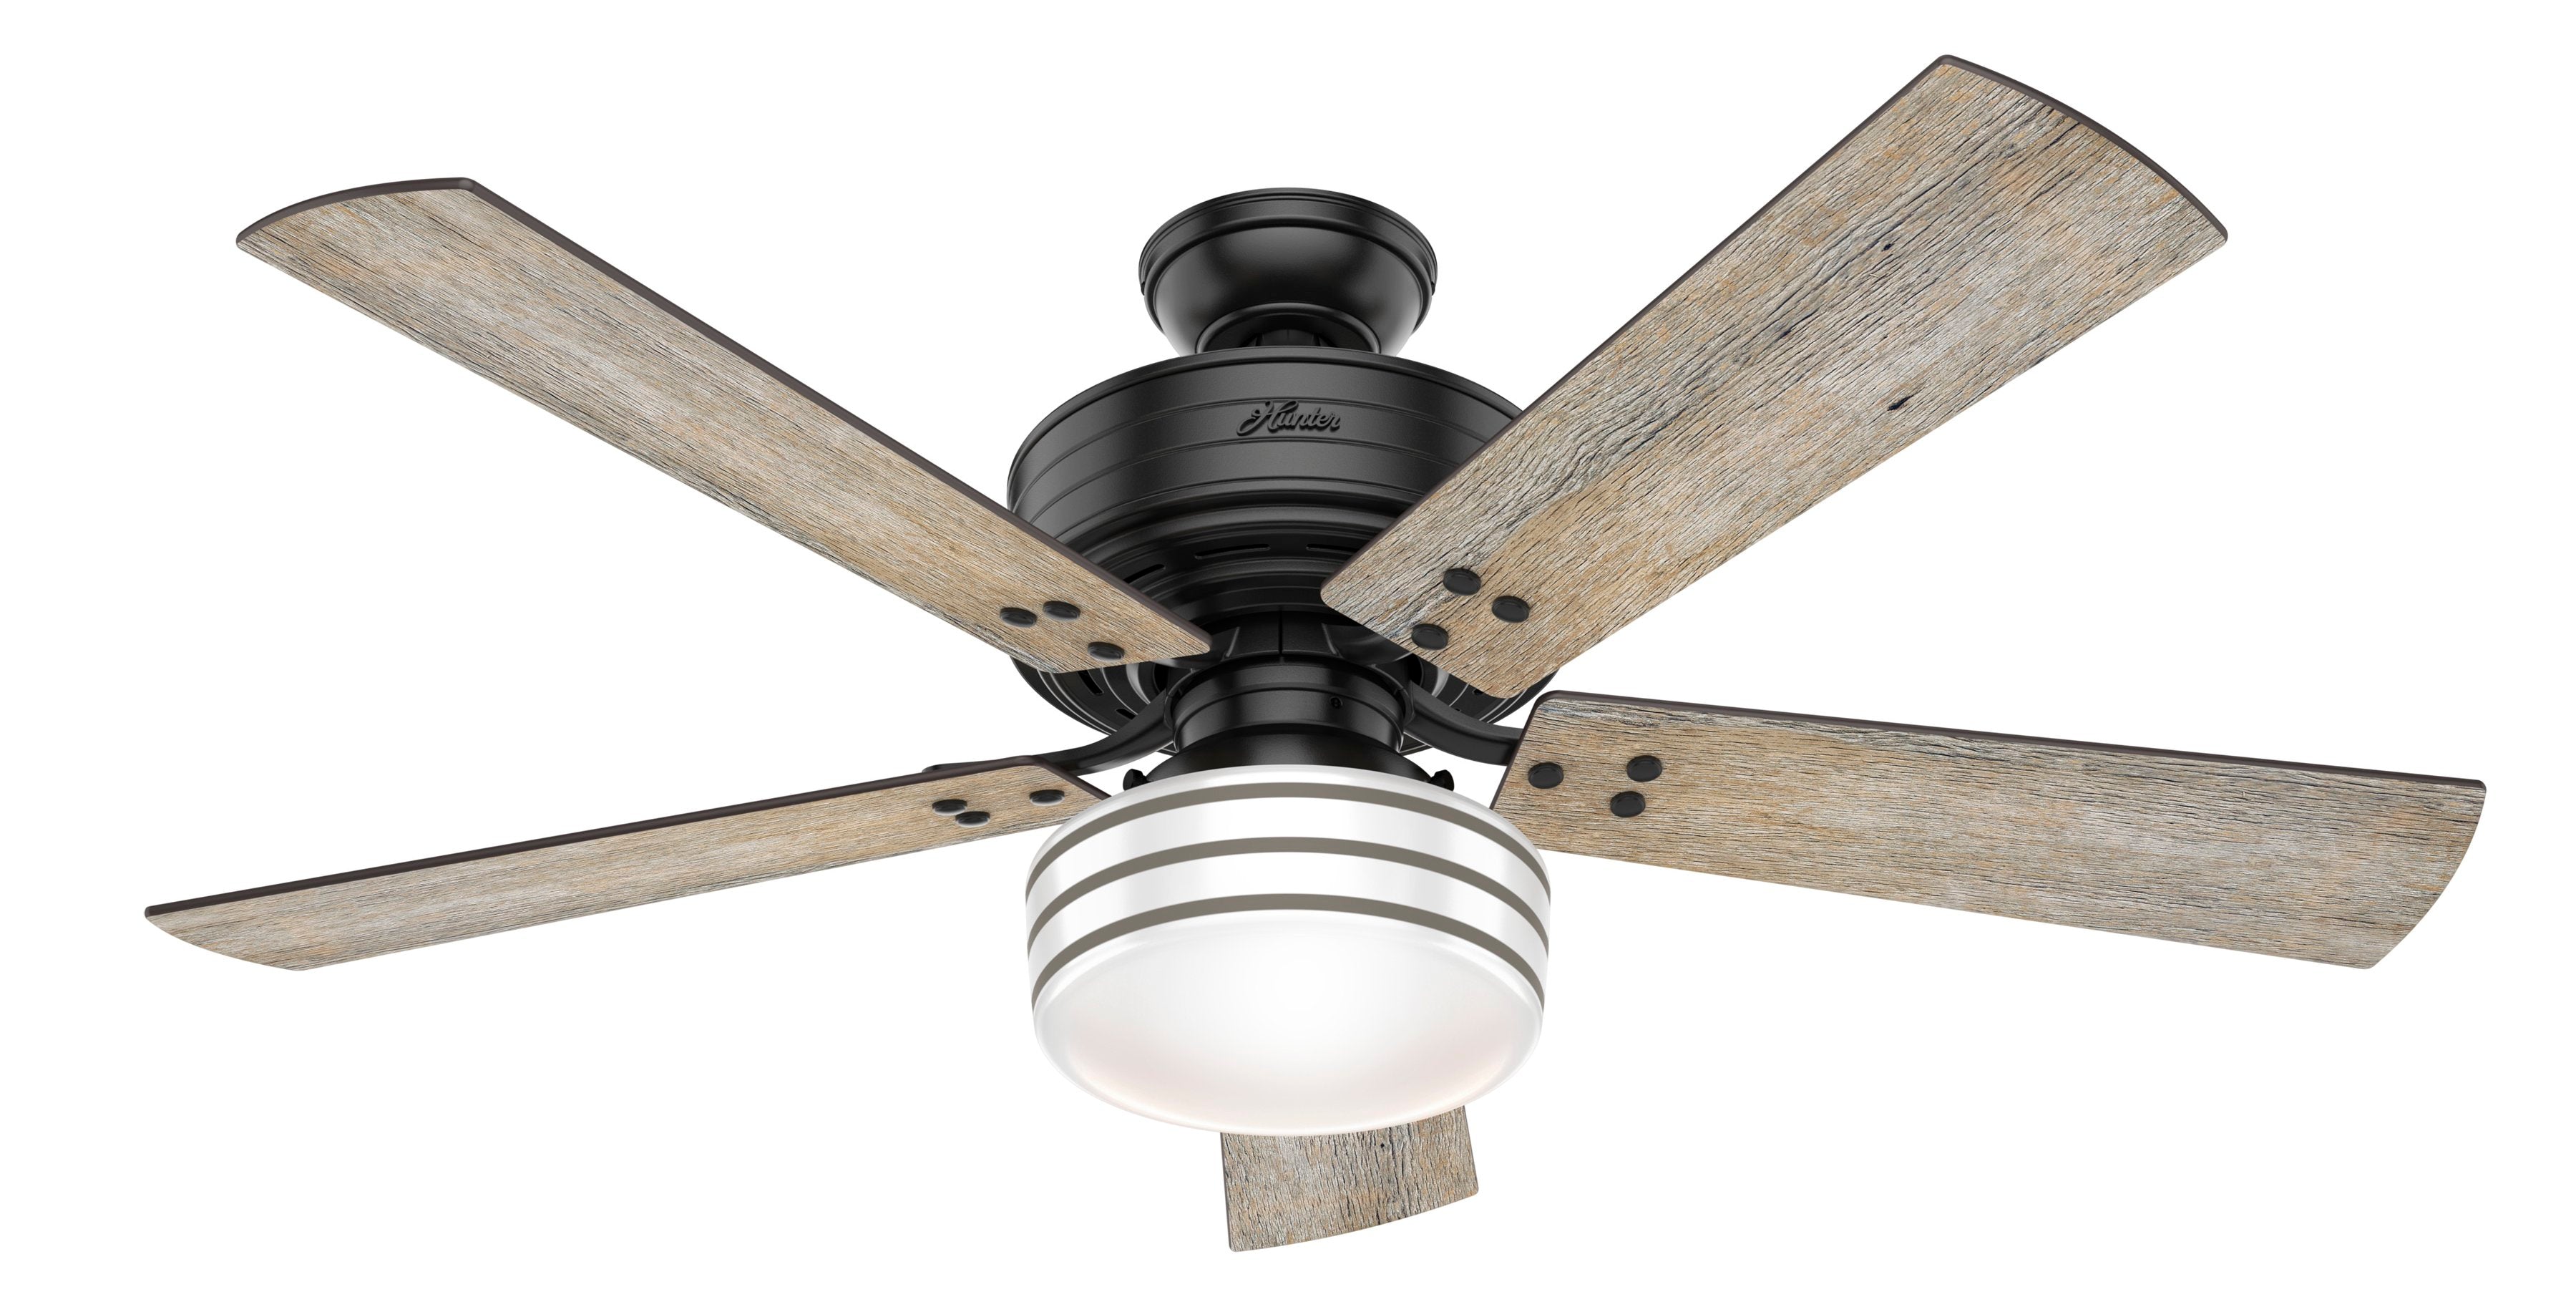 Hunter 52 inch Cedar Key Damp Rated Ceiling Fan with LED Light Kit and Handheld Remote